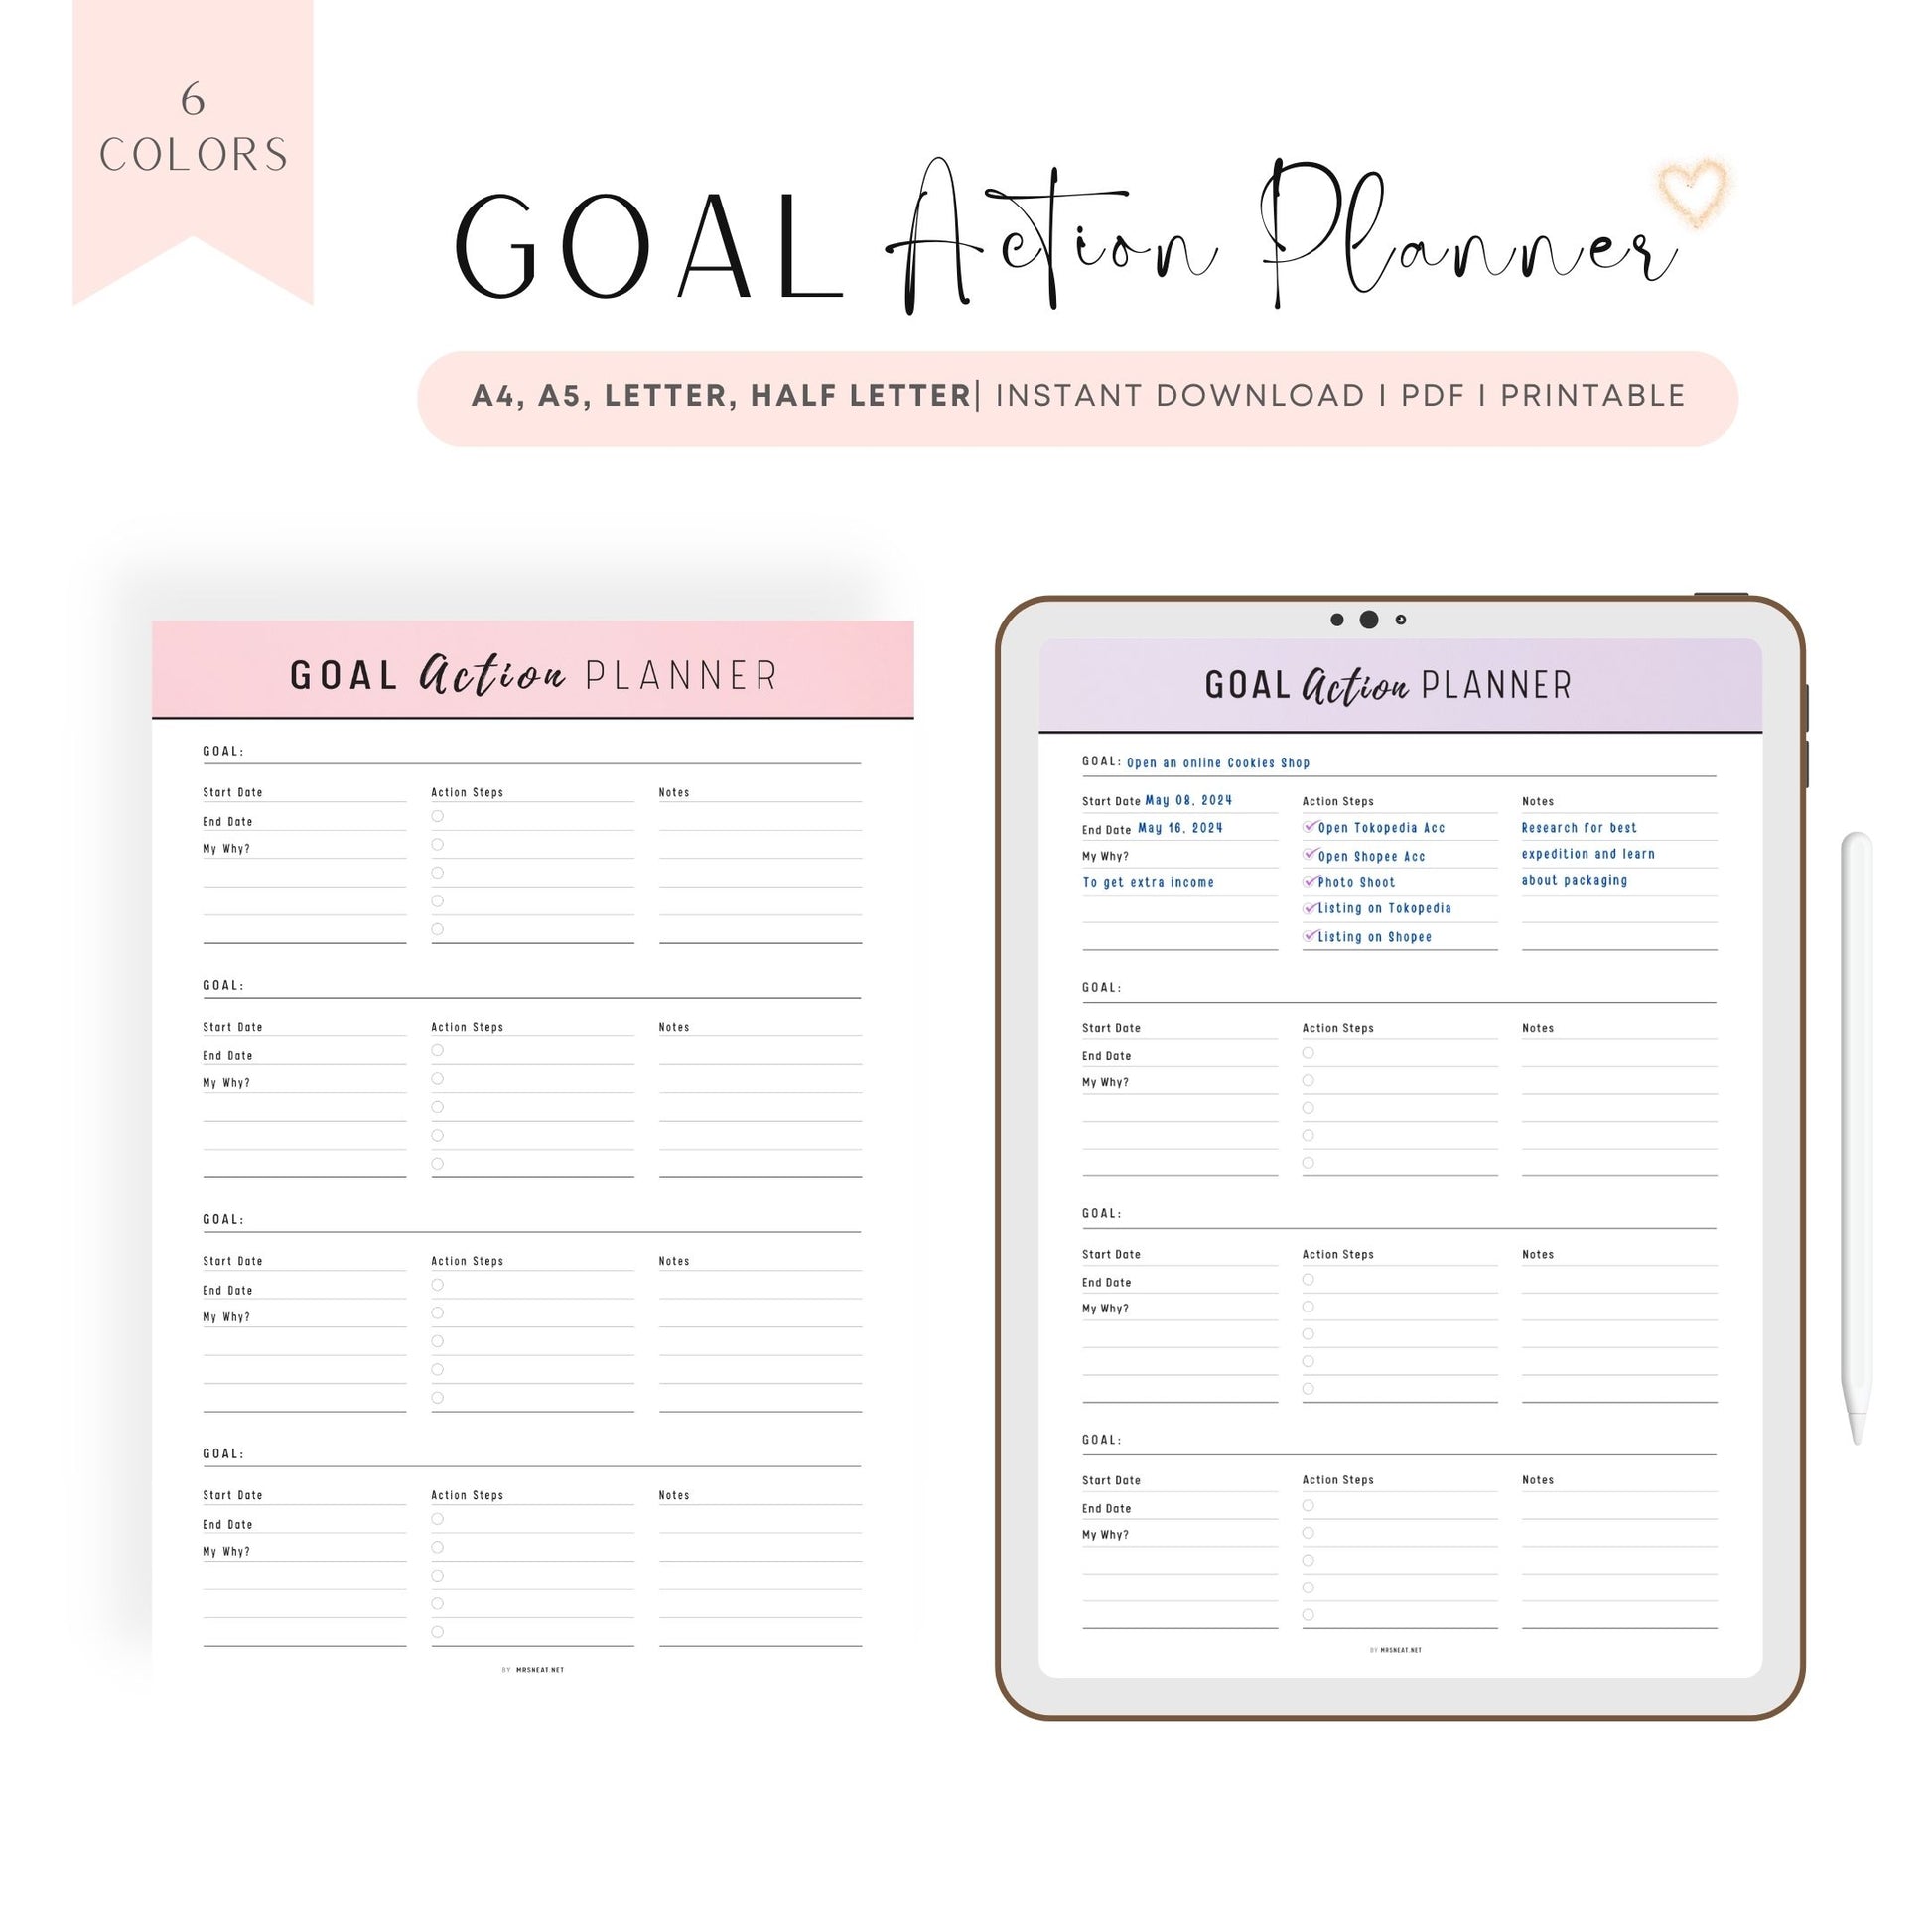 Goal Action Planner Template Printable